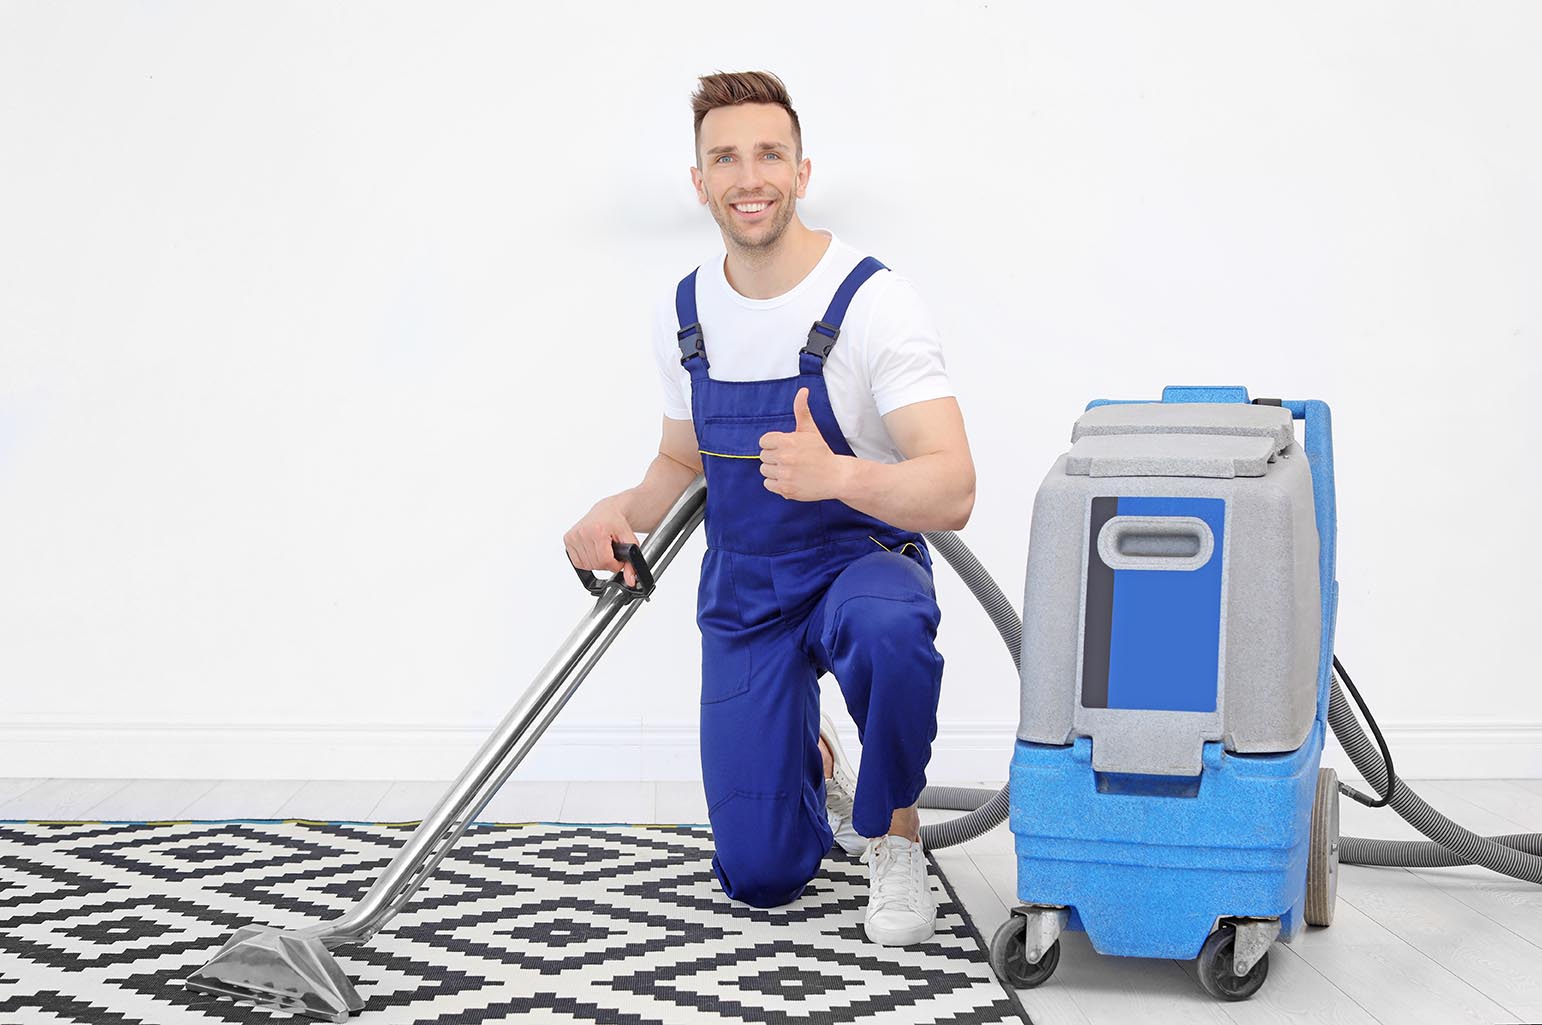 Why Do You Need an End-of-Lease Cleaning Service?